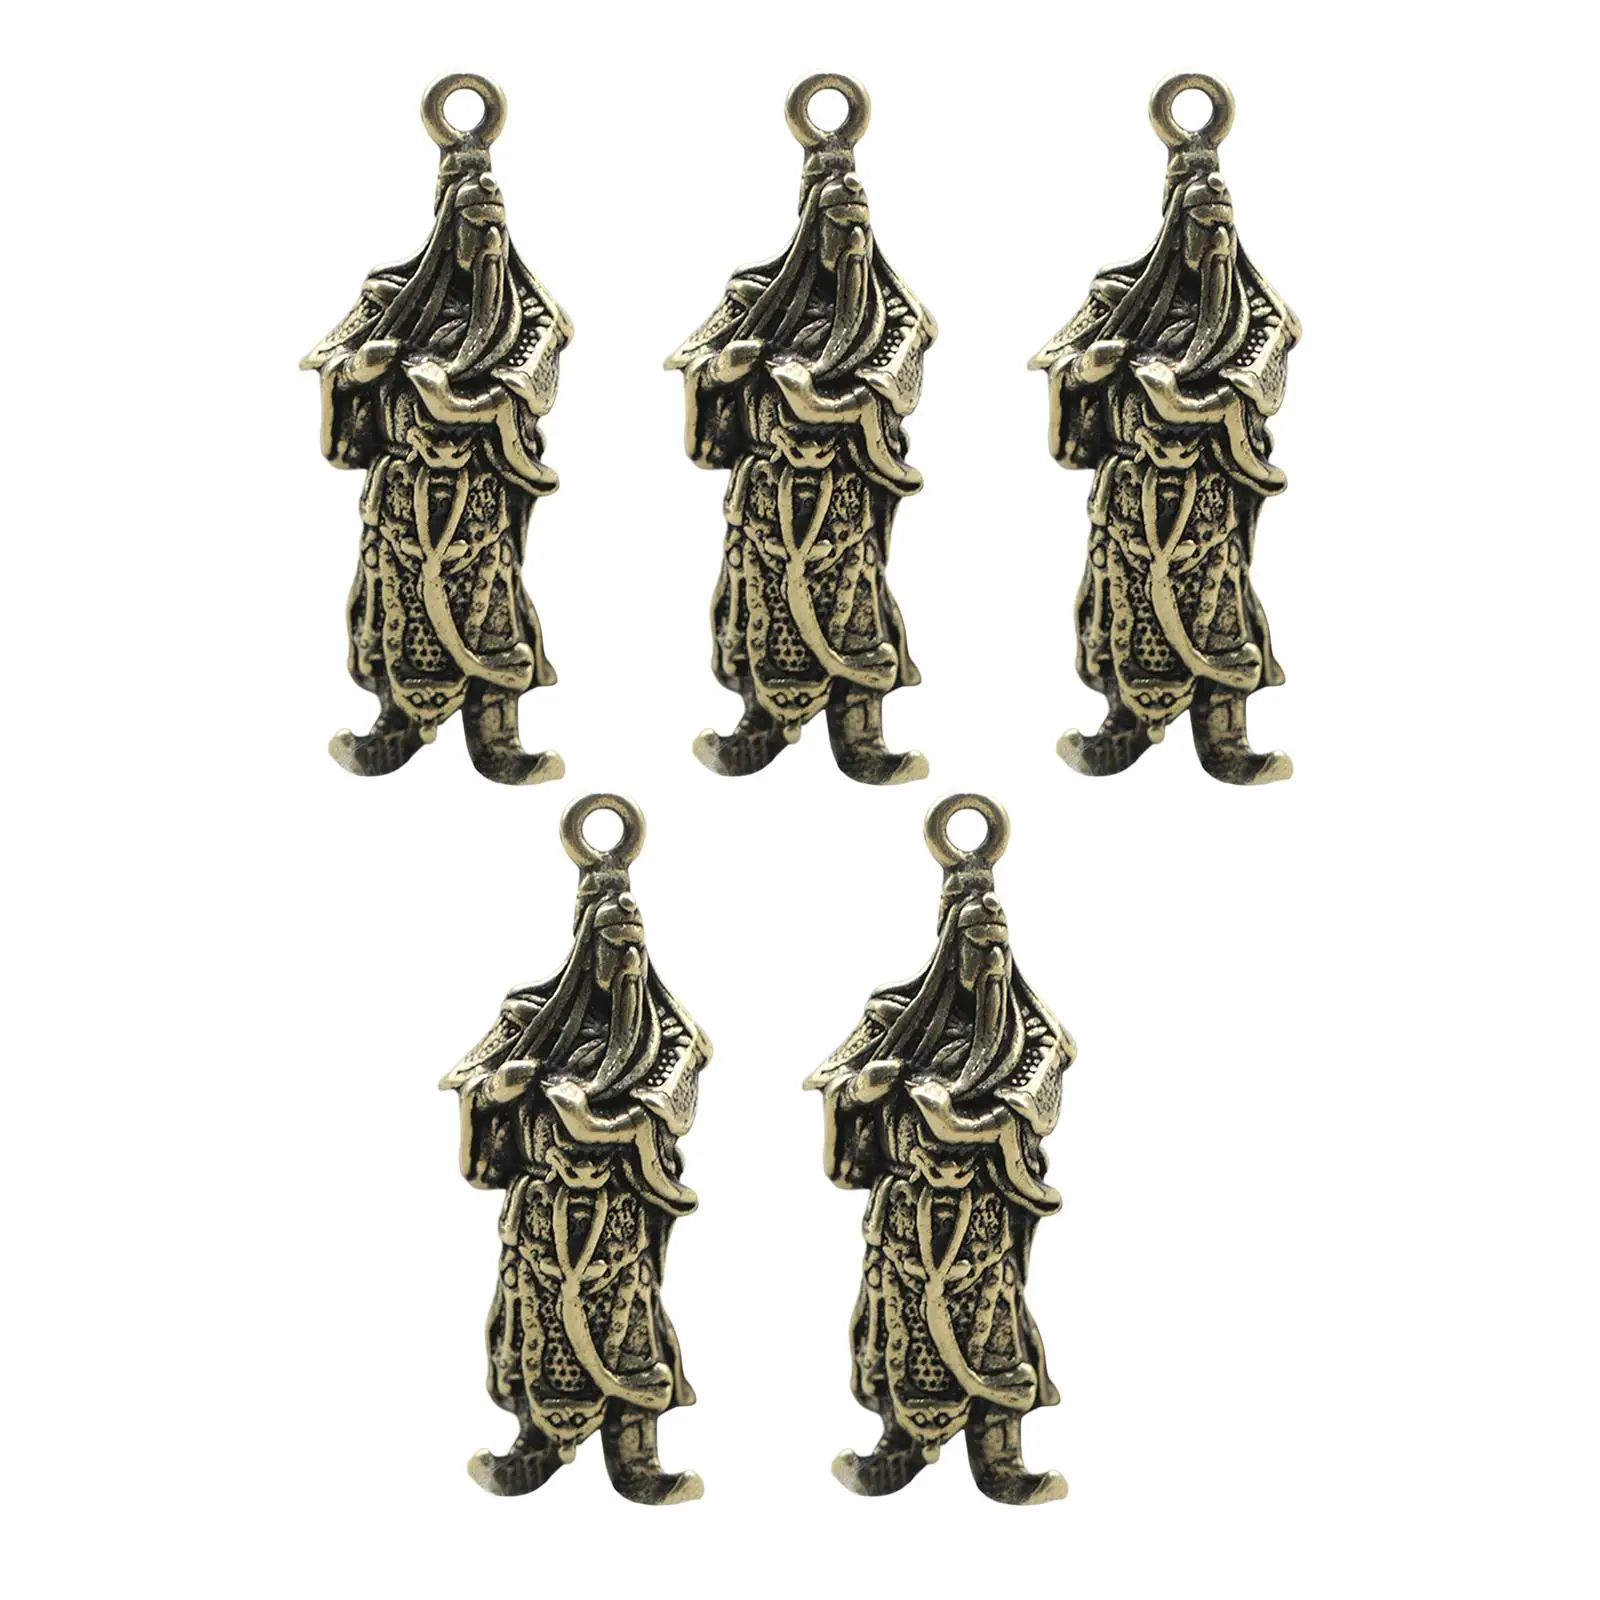 5Pcs Chinese Small Statues Figurine Ornaments Pendant Charm Collectible for Decor Home Decoration Keychains Findings Necklace